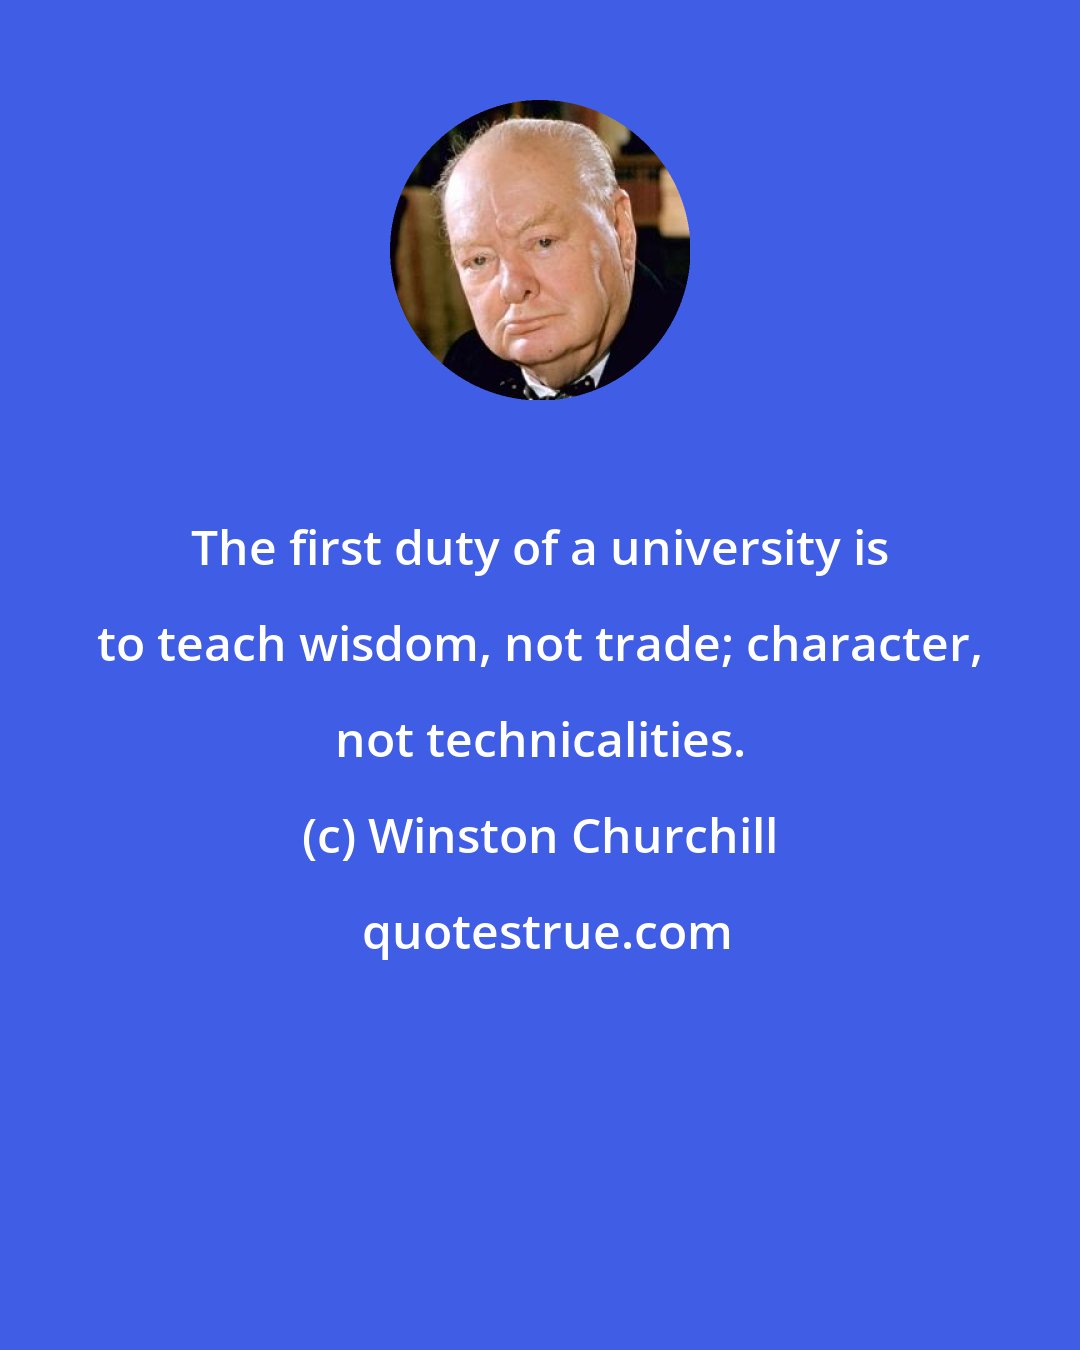 Winston Churchill: The first duty of a university is to teach wisdom, not trade; character, not technicalities.